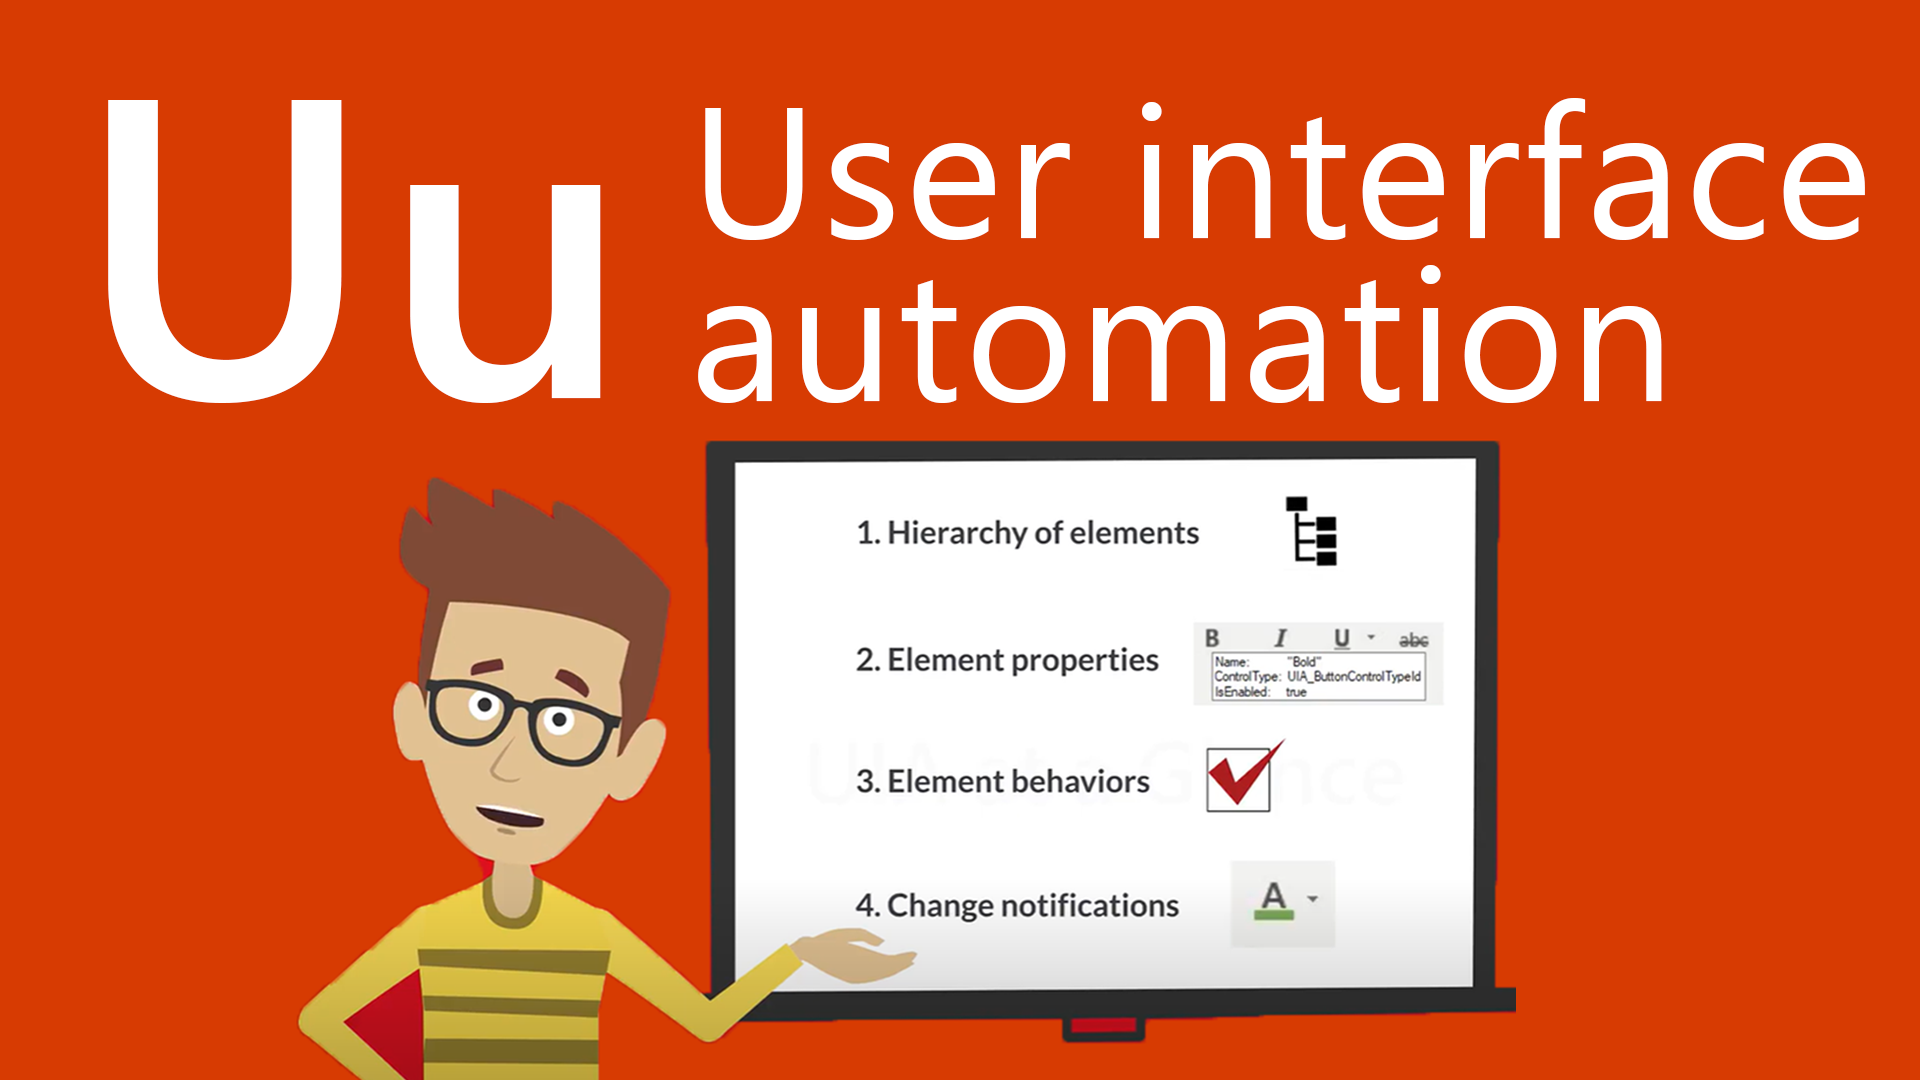 U is for user interface automation. Image shows an introduction to UI Automation